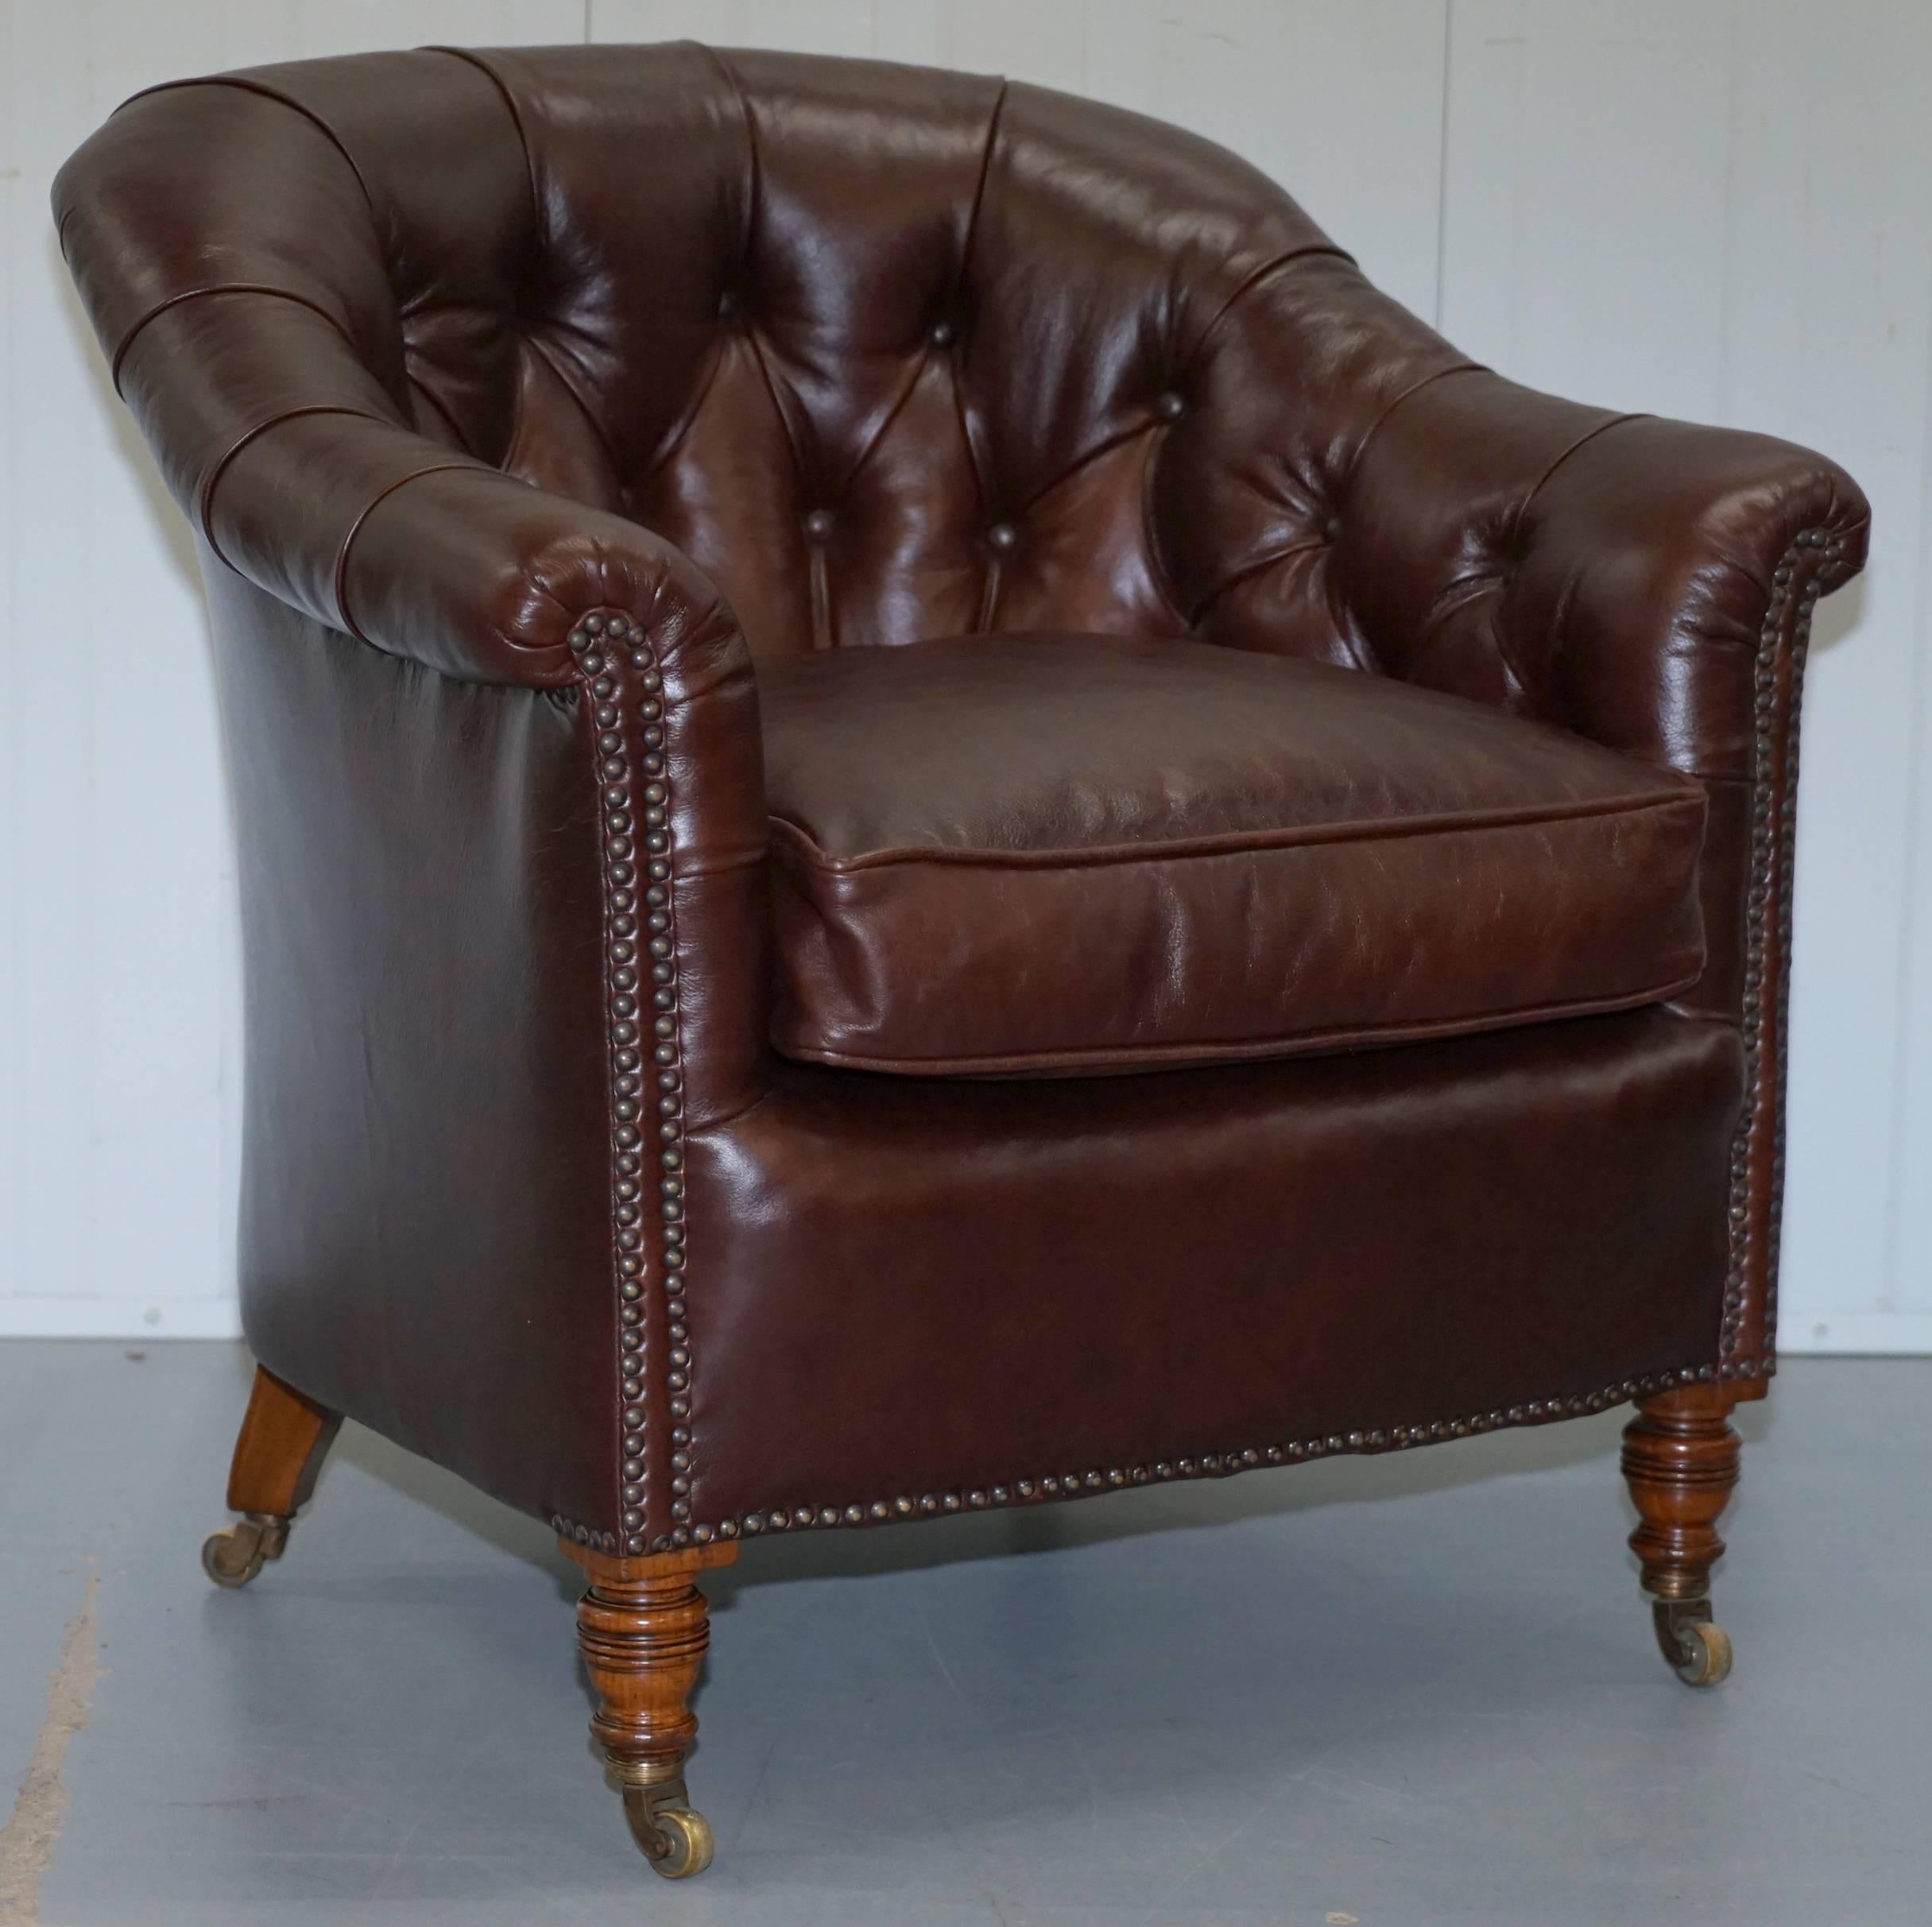 Rare pair of original Howard & Sons fully stamped with original castors Victorian fully restored brown leather club tub armchairs

Please note the delivery fee listed is just a guide, for an accurate quote please send me your postcode and I’ll price